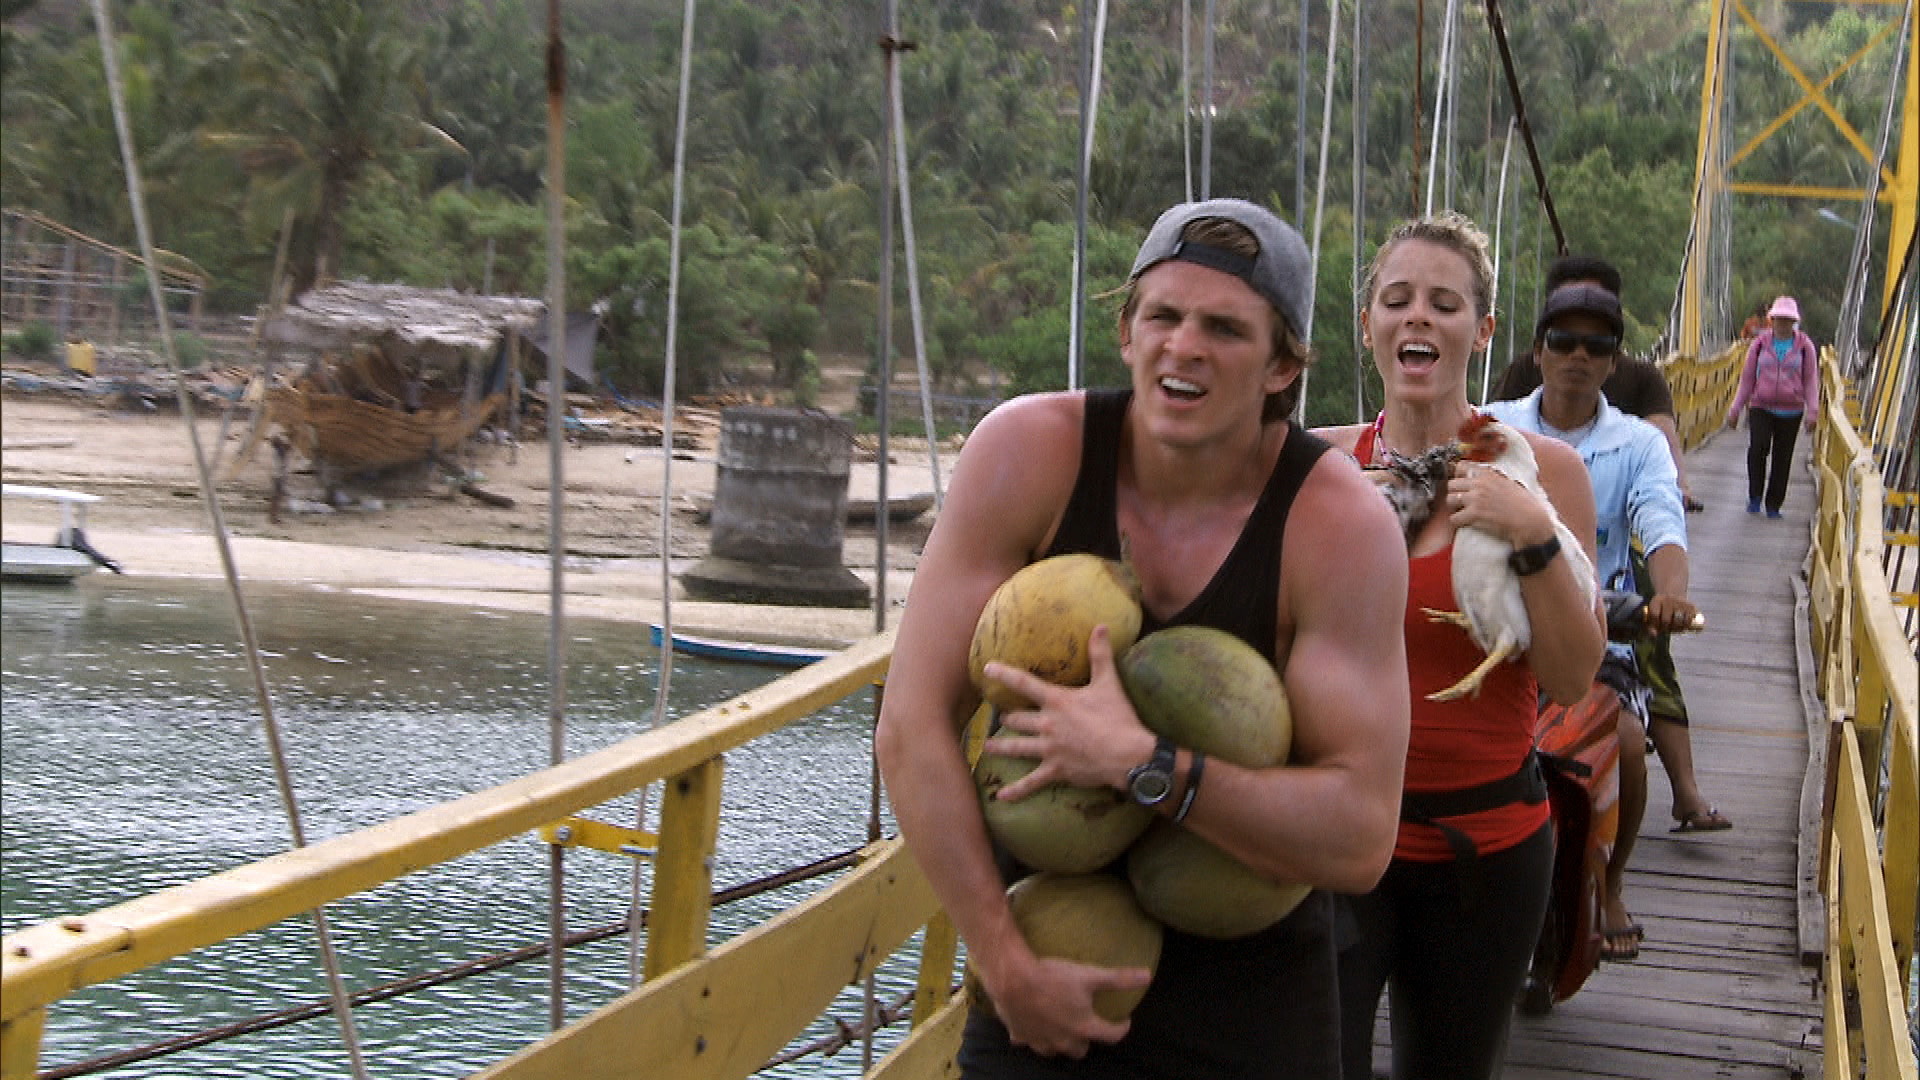 Cole and Sheri run across the bridge, carrying chickens and coconuts, to the Cenigan side.